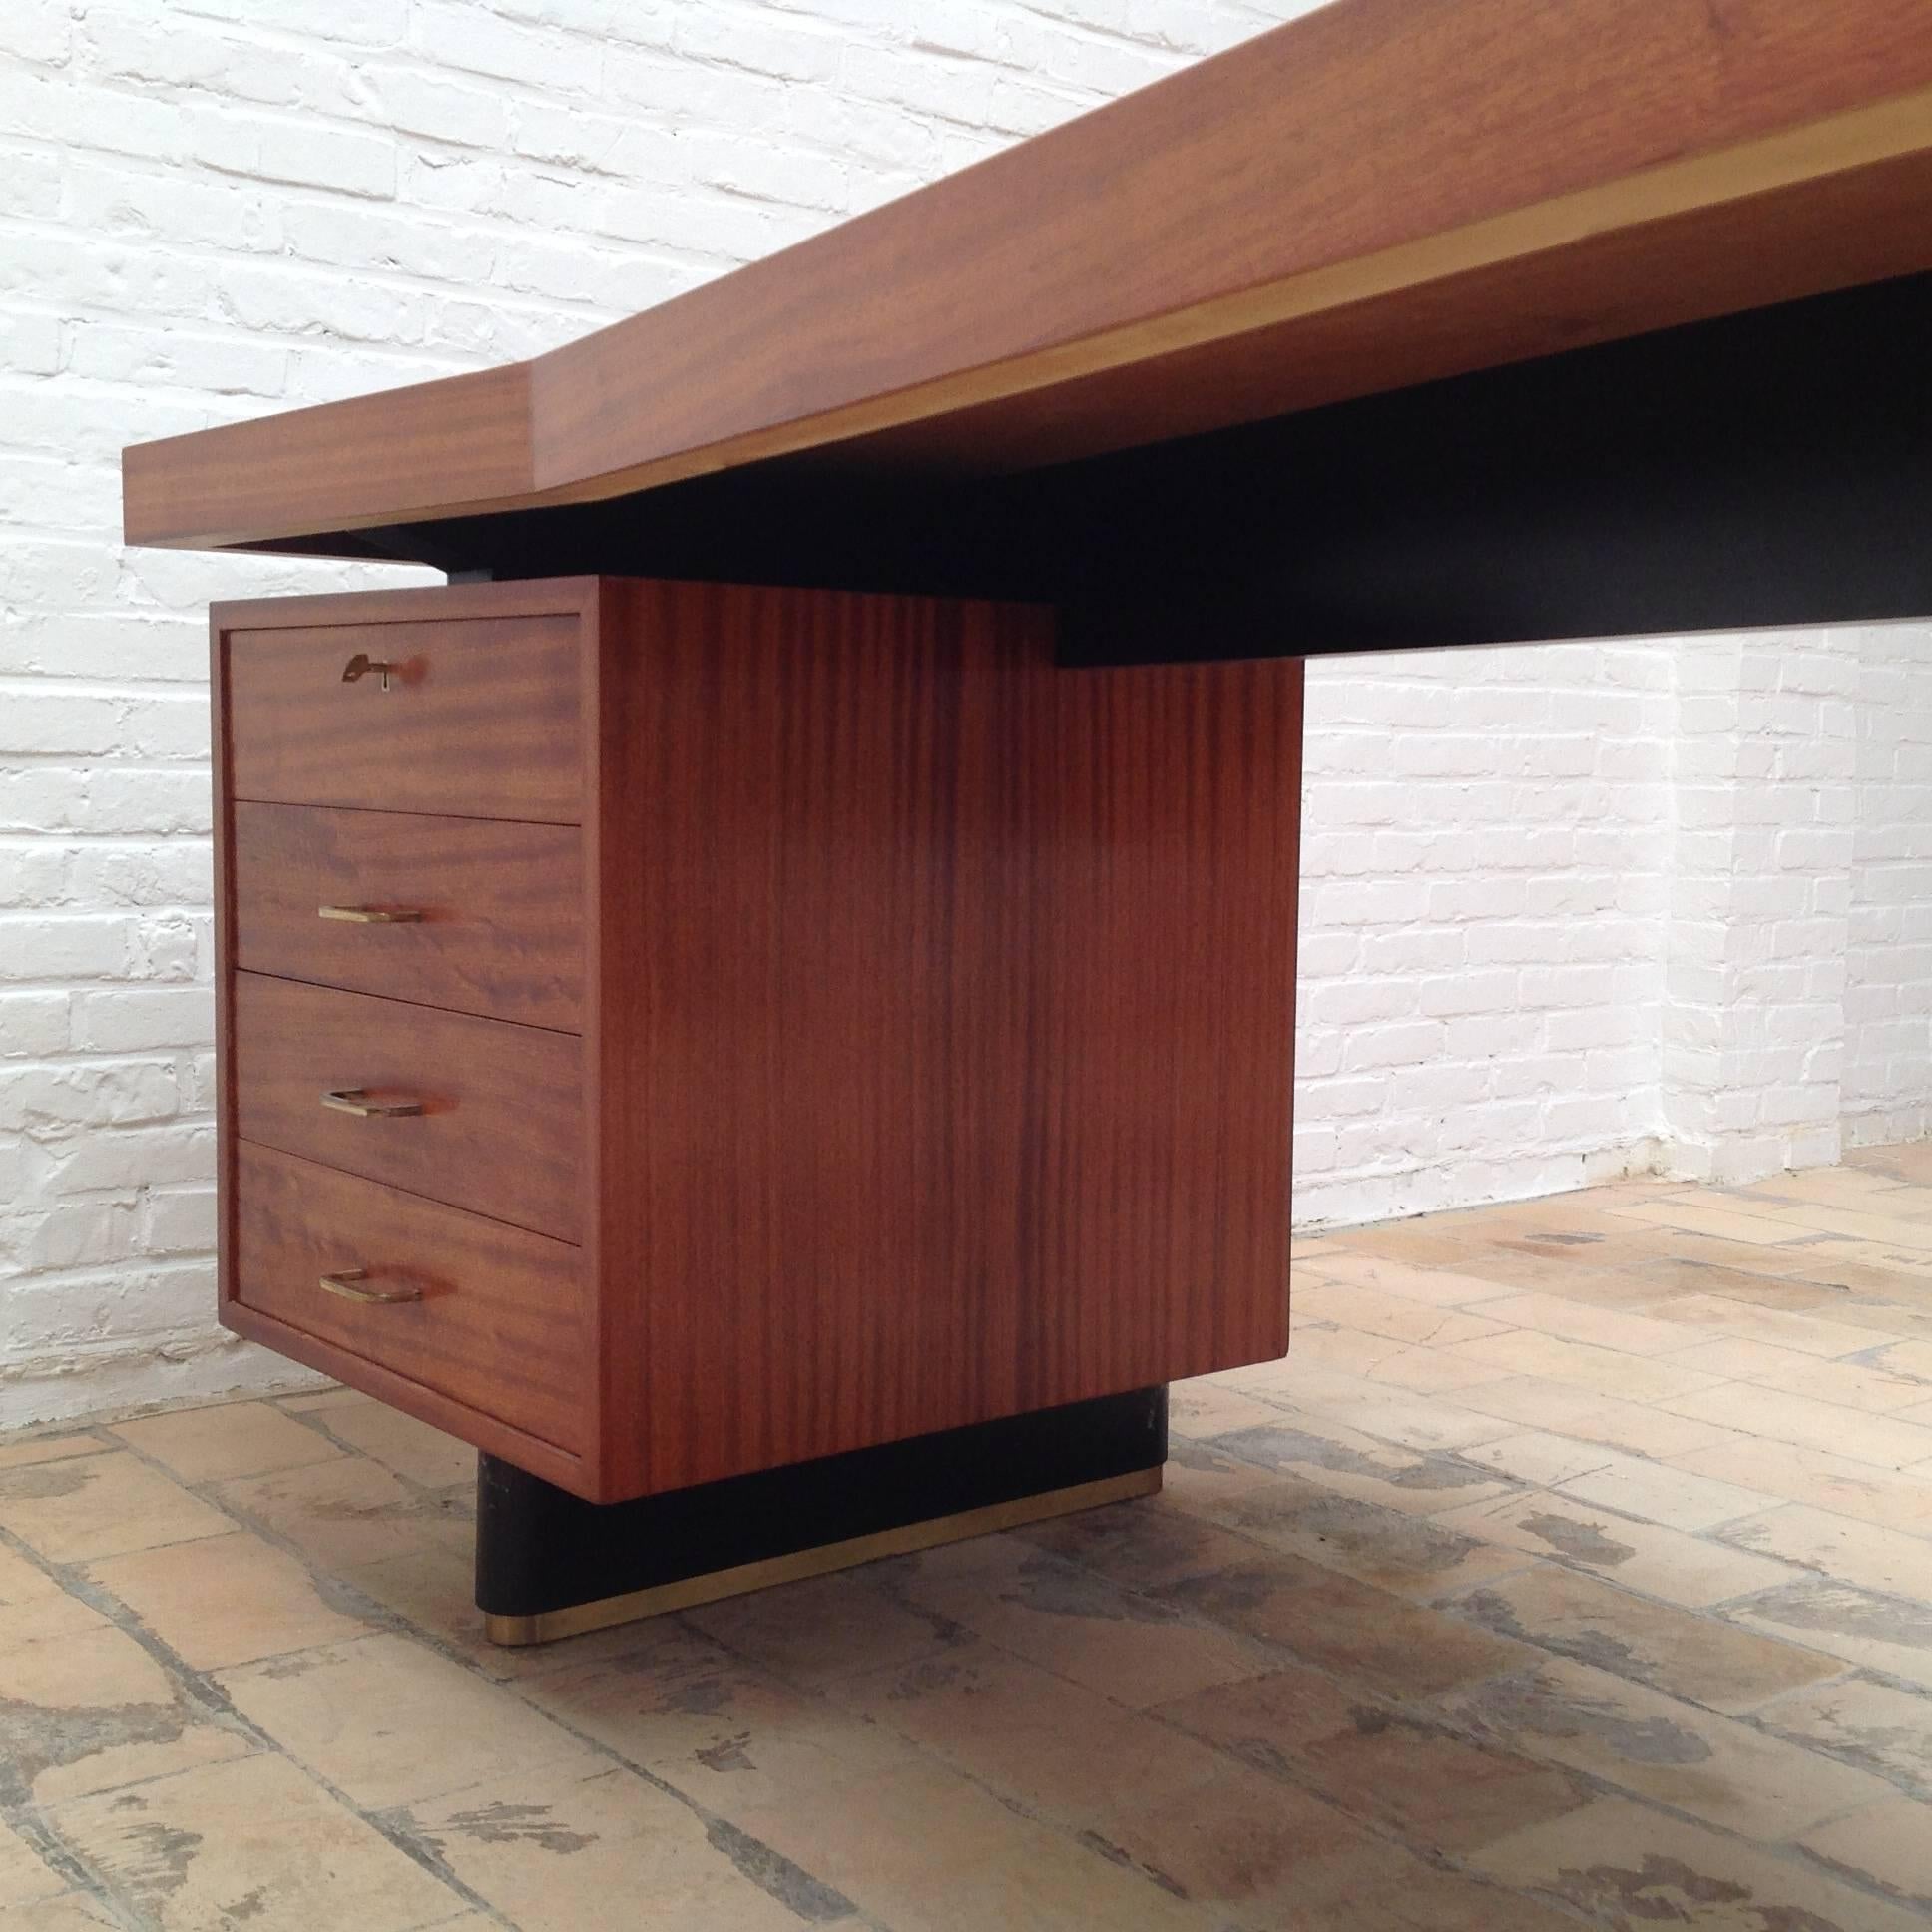 Very exclusive desk, designed by Belgian architect, Jos De Mey.
You can almost say that's a bureau of Jean Prouvé....
Look at the beautiful lines and finished with brass details....
You almost never find these with the same wooden top as a drawer